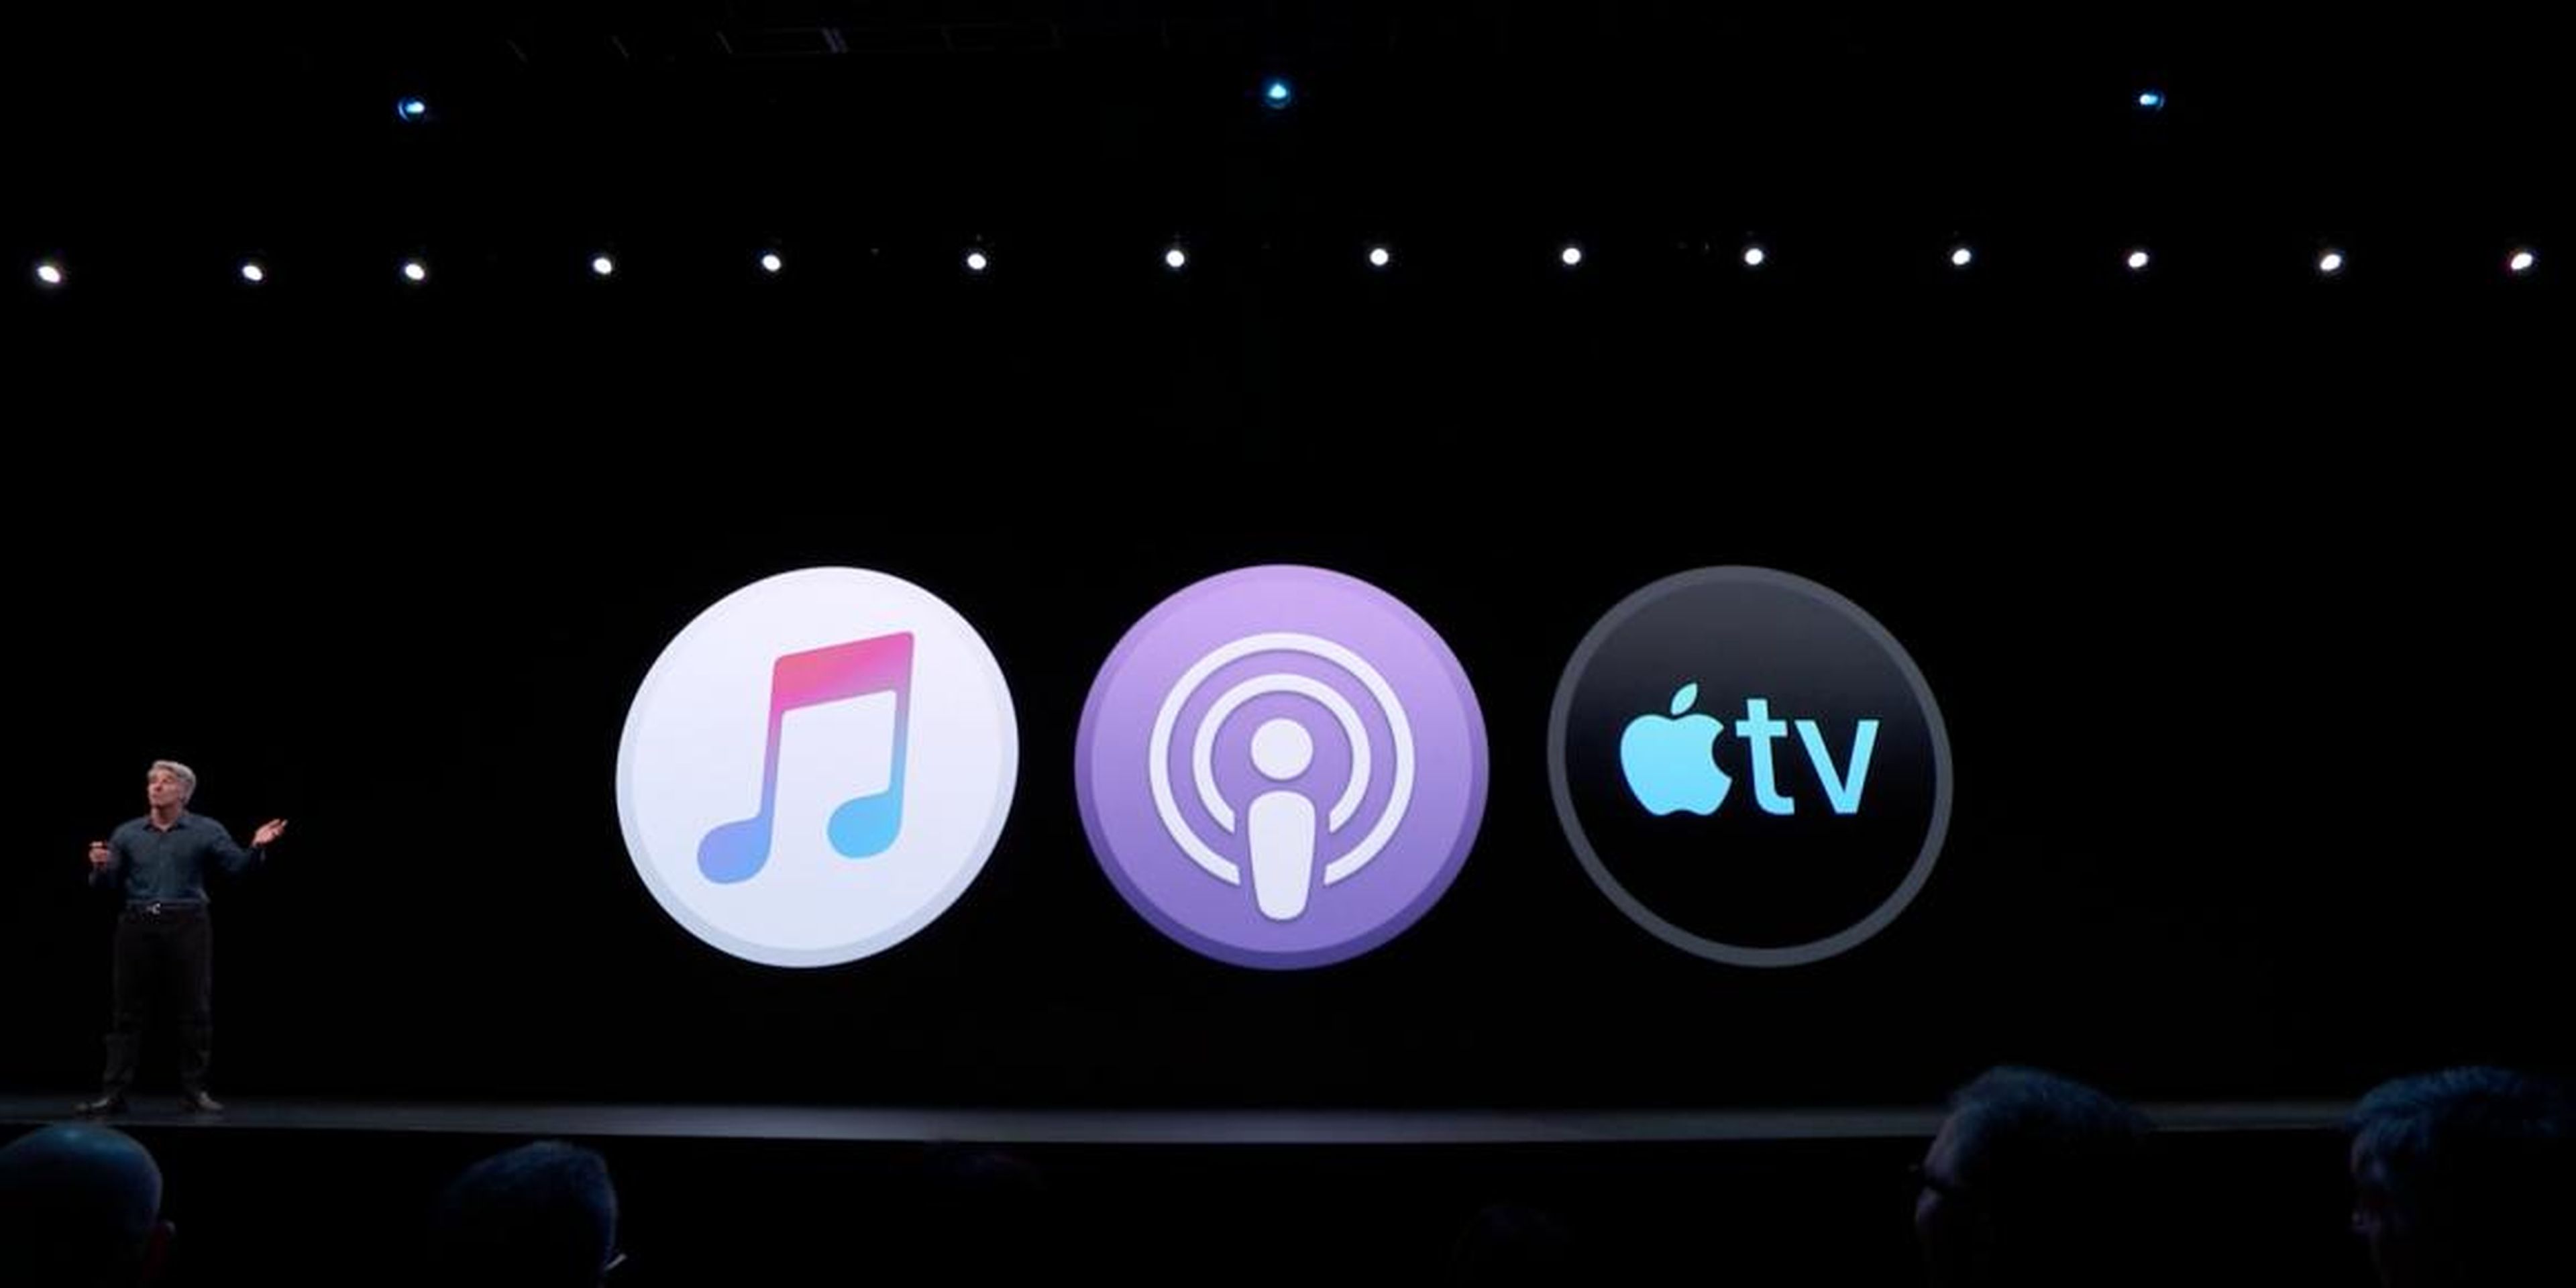 Apple is replacing the iTunes app in macOS Catalina with three separate apps: Apple Music, Apple Podcasts, and Apple TV.